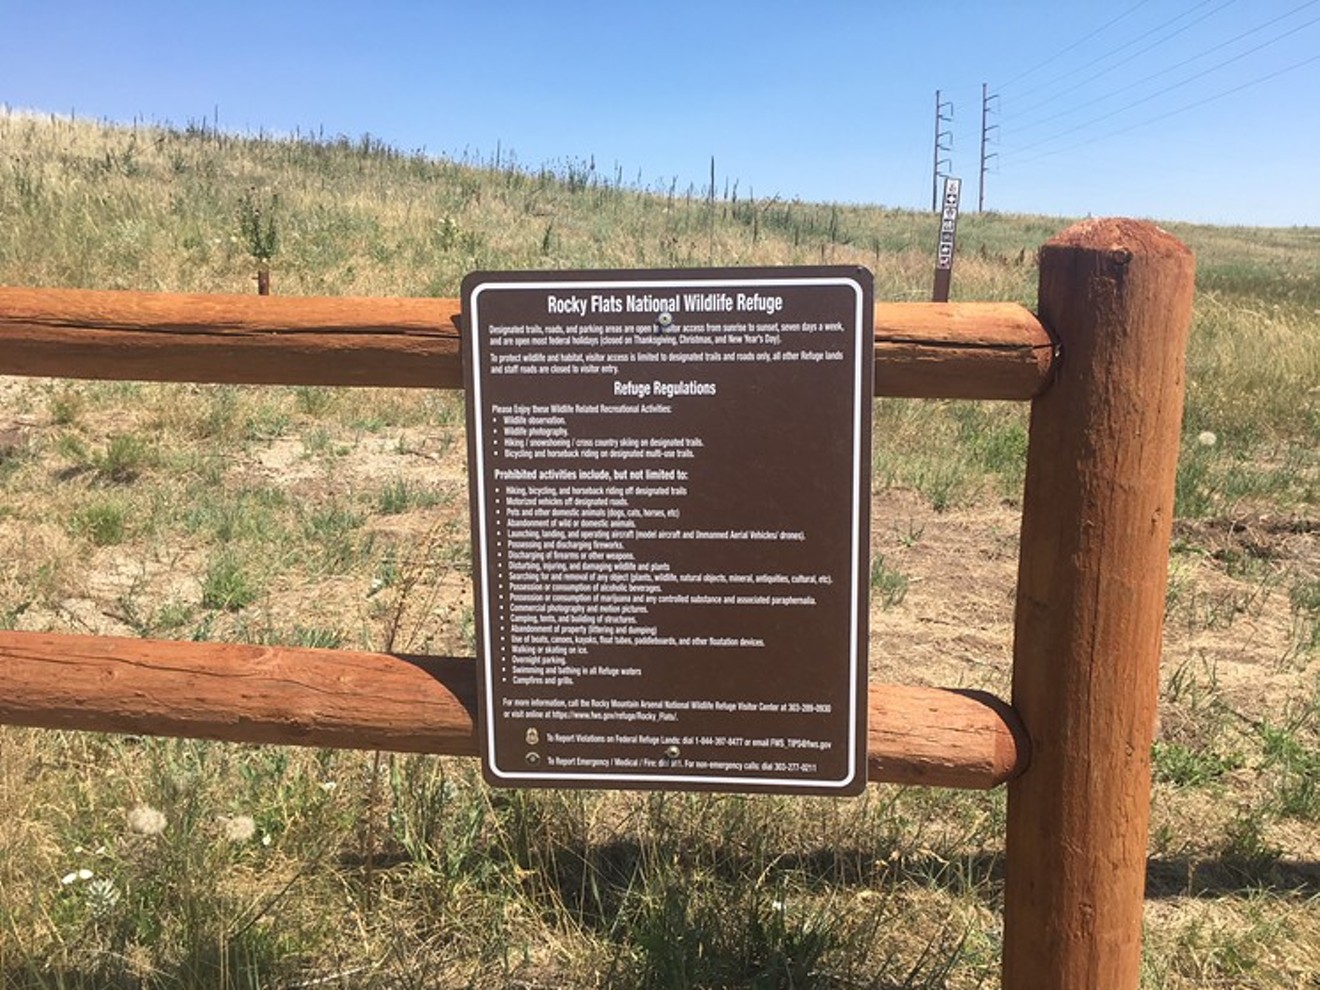 A southern entrance to the Rocky Flats National Wildlife Refuge, near the parkway's proposed path.